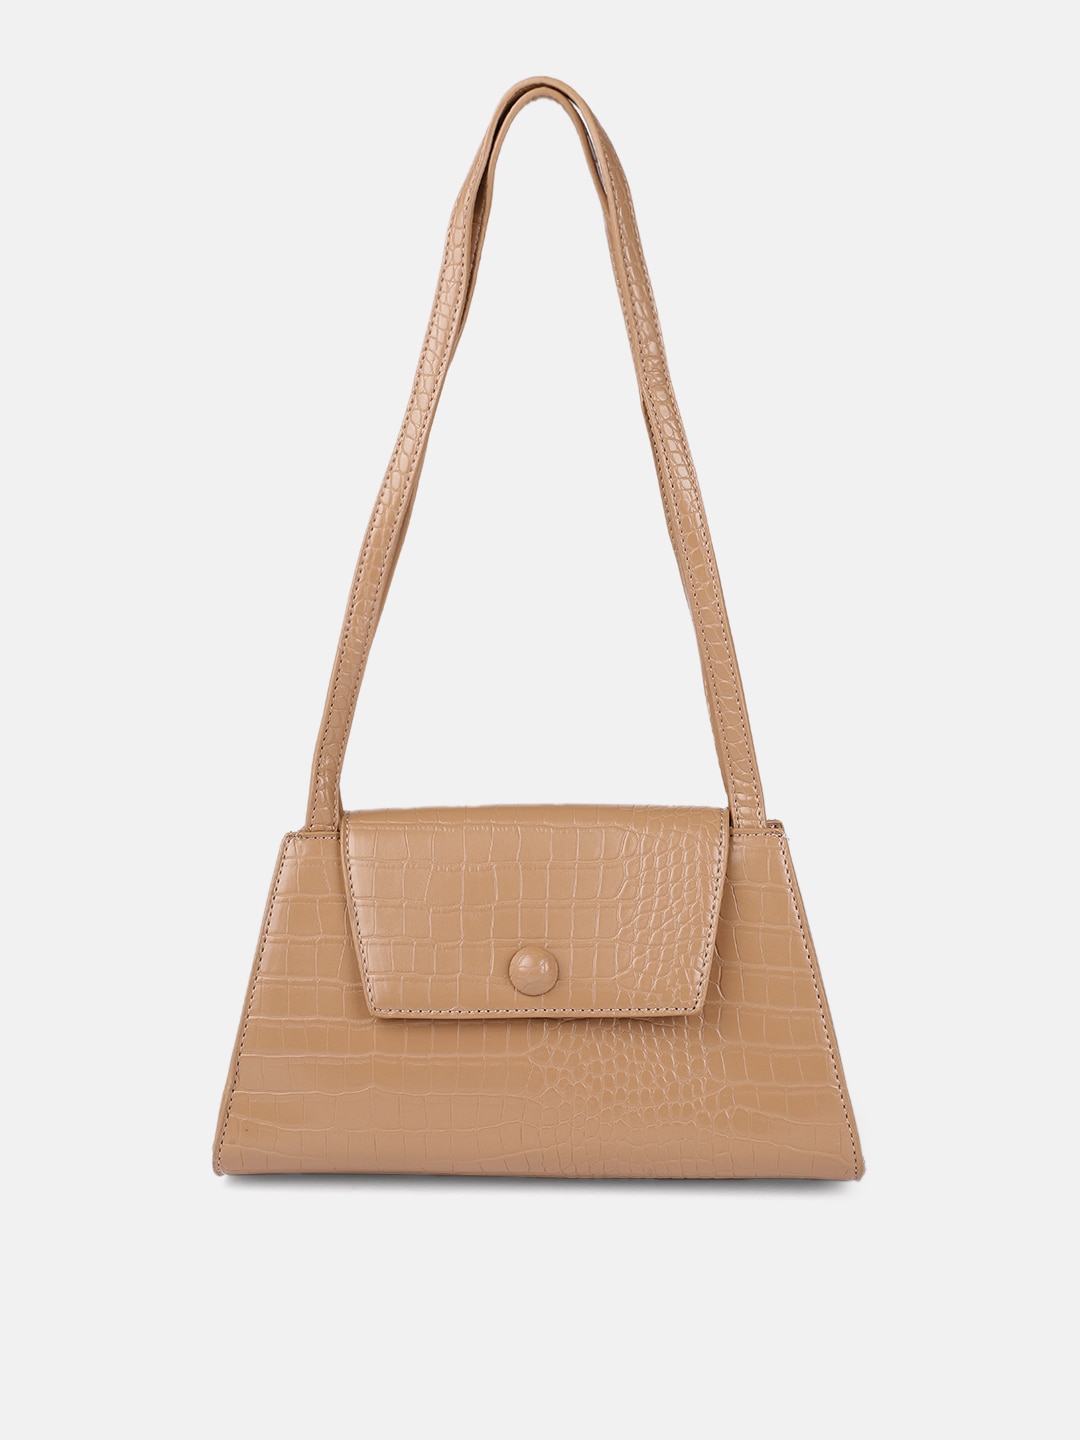 Mast & Harbour Brown Textured Sling Bag Price in India